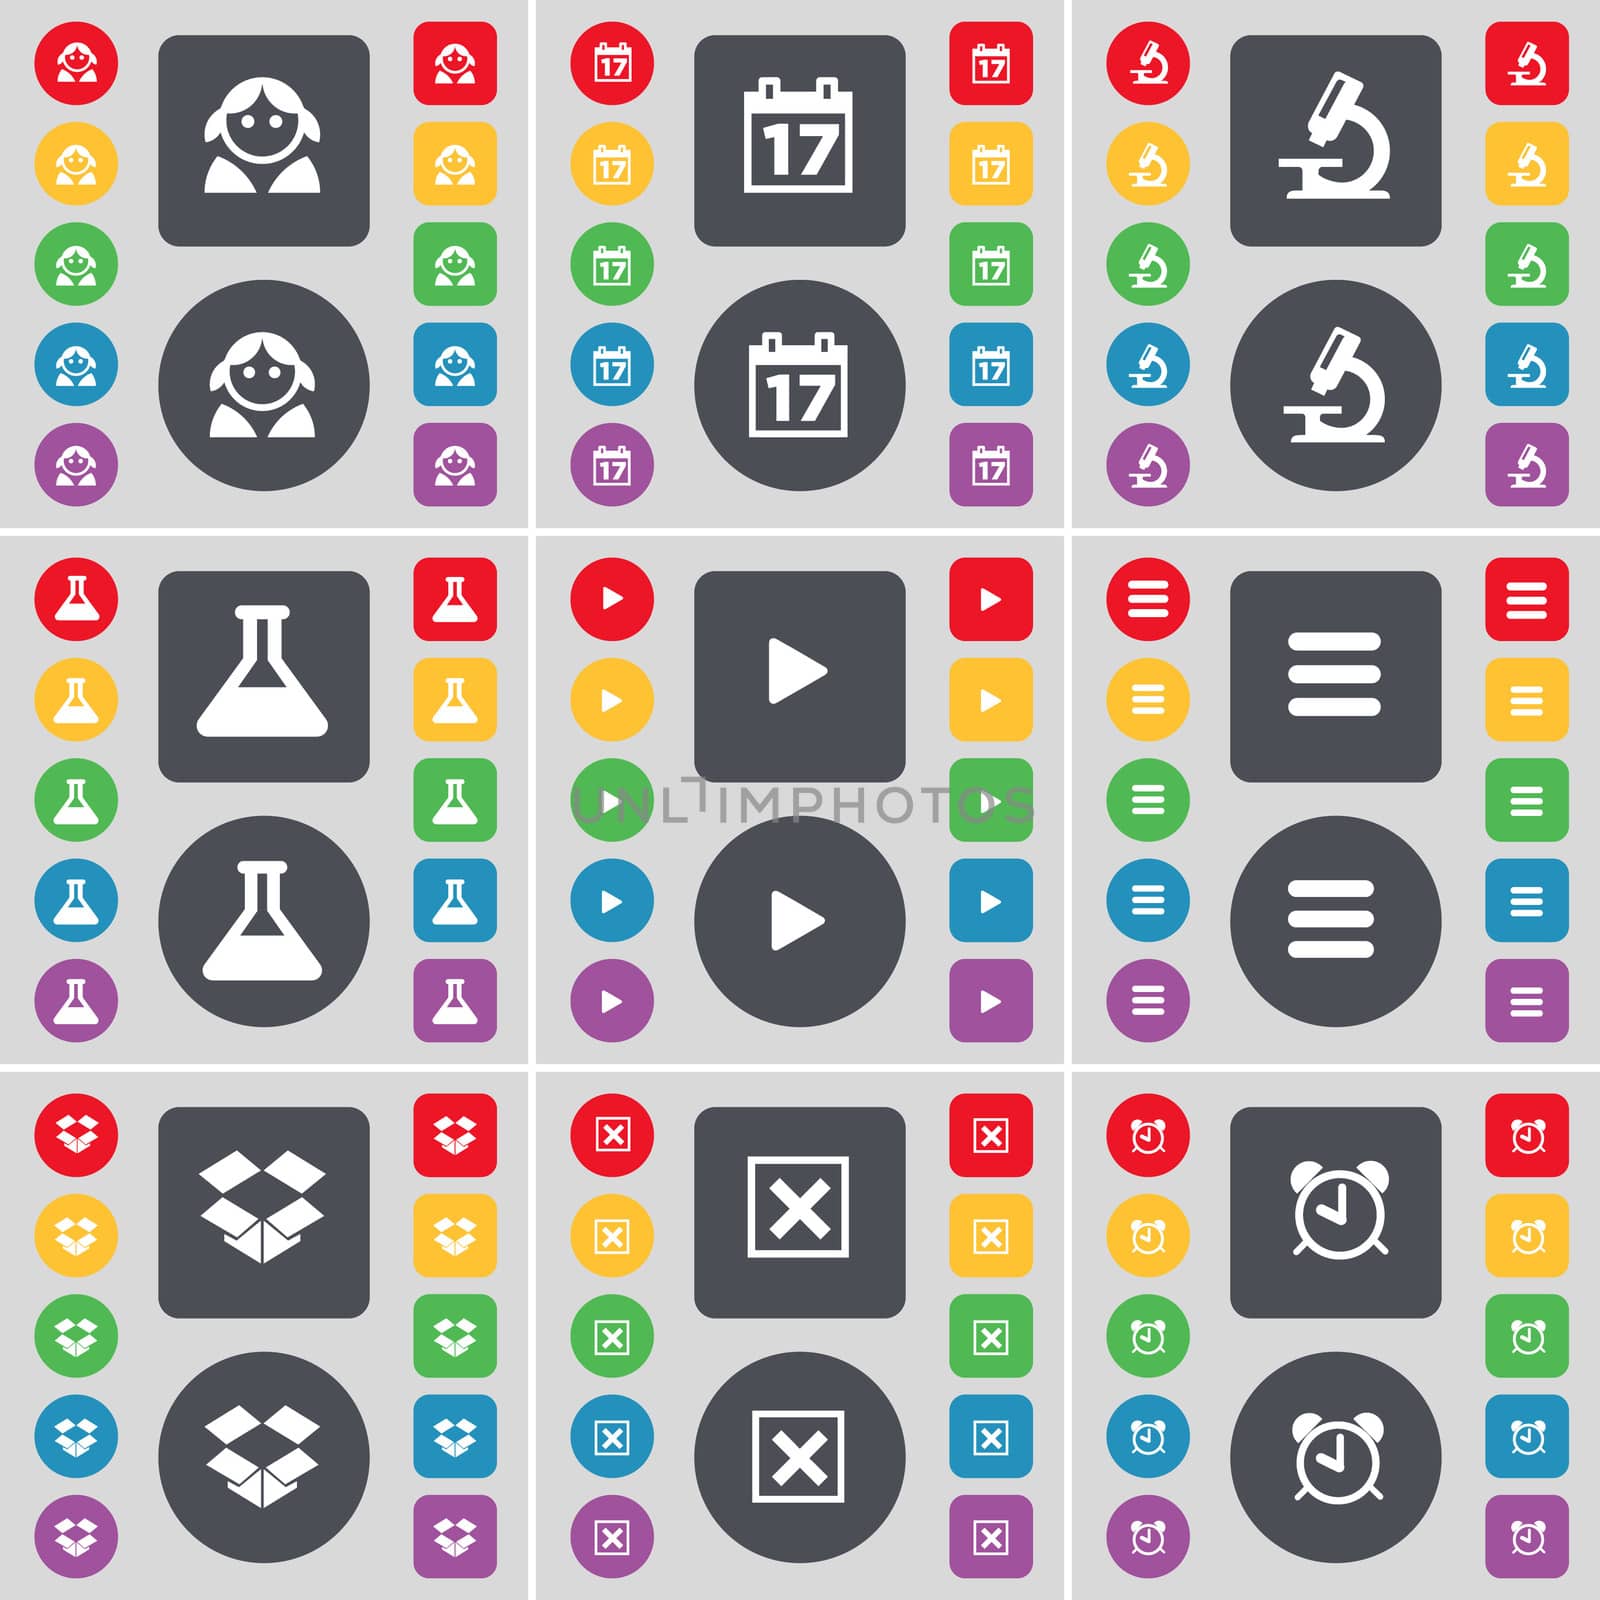 Avatar, Calendar, Microscope, Flask, Media play, Apps, Dropbox, Stop, Alarm clock icon symbol. A large set of flat, colored buttons for your design. illustration